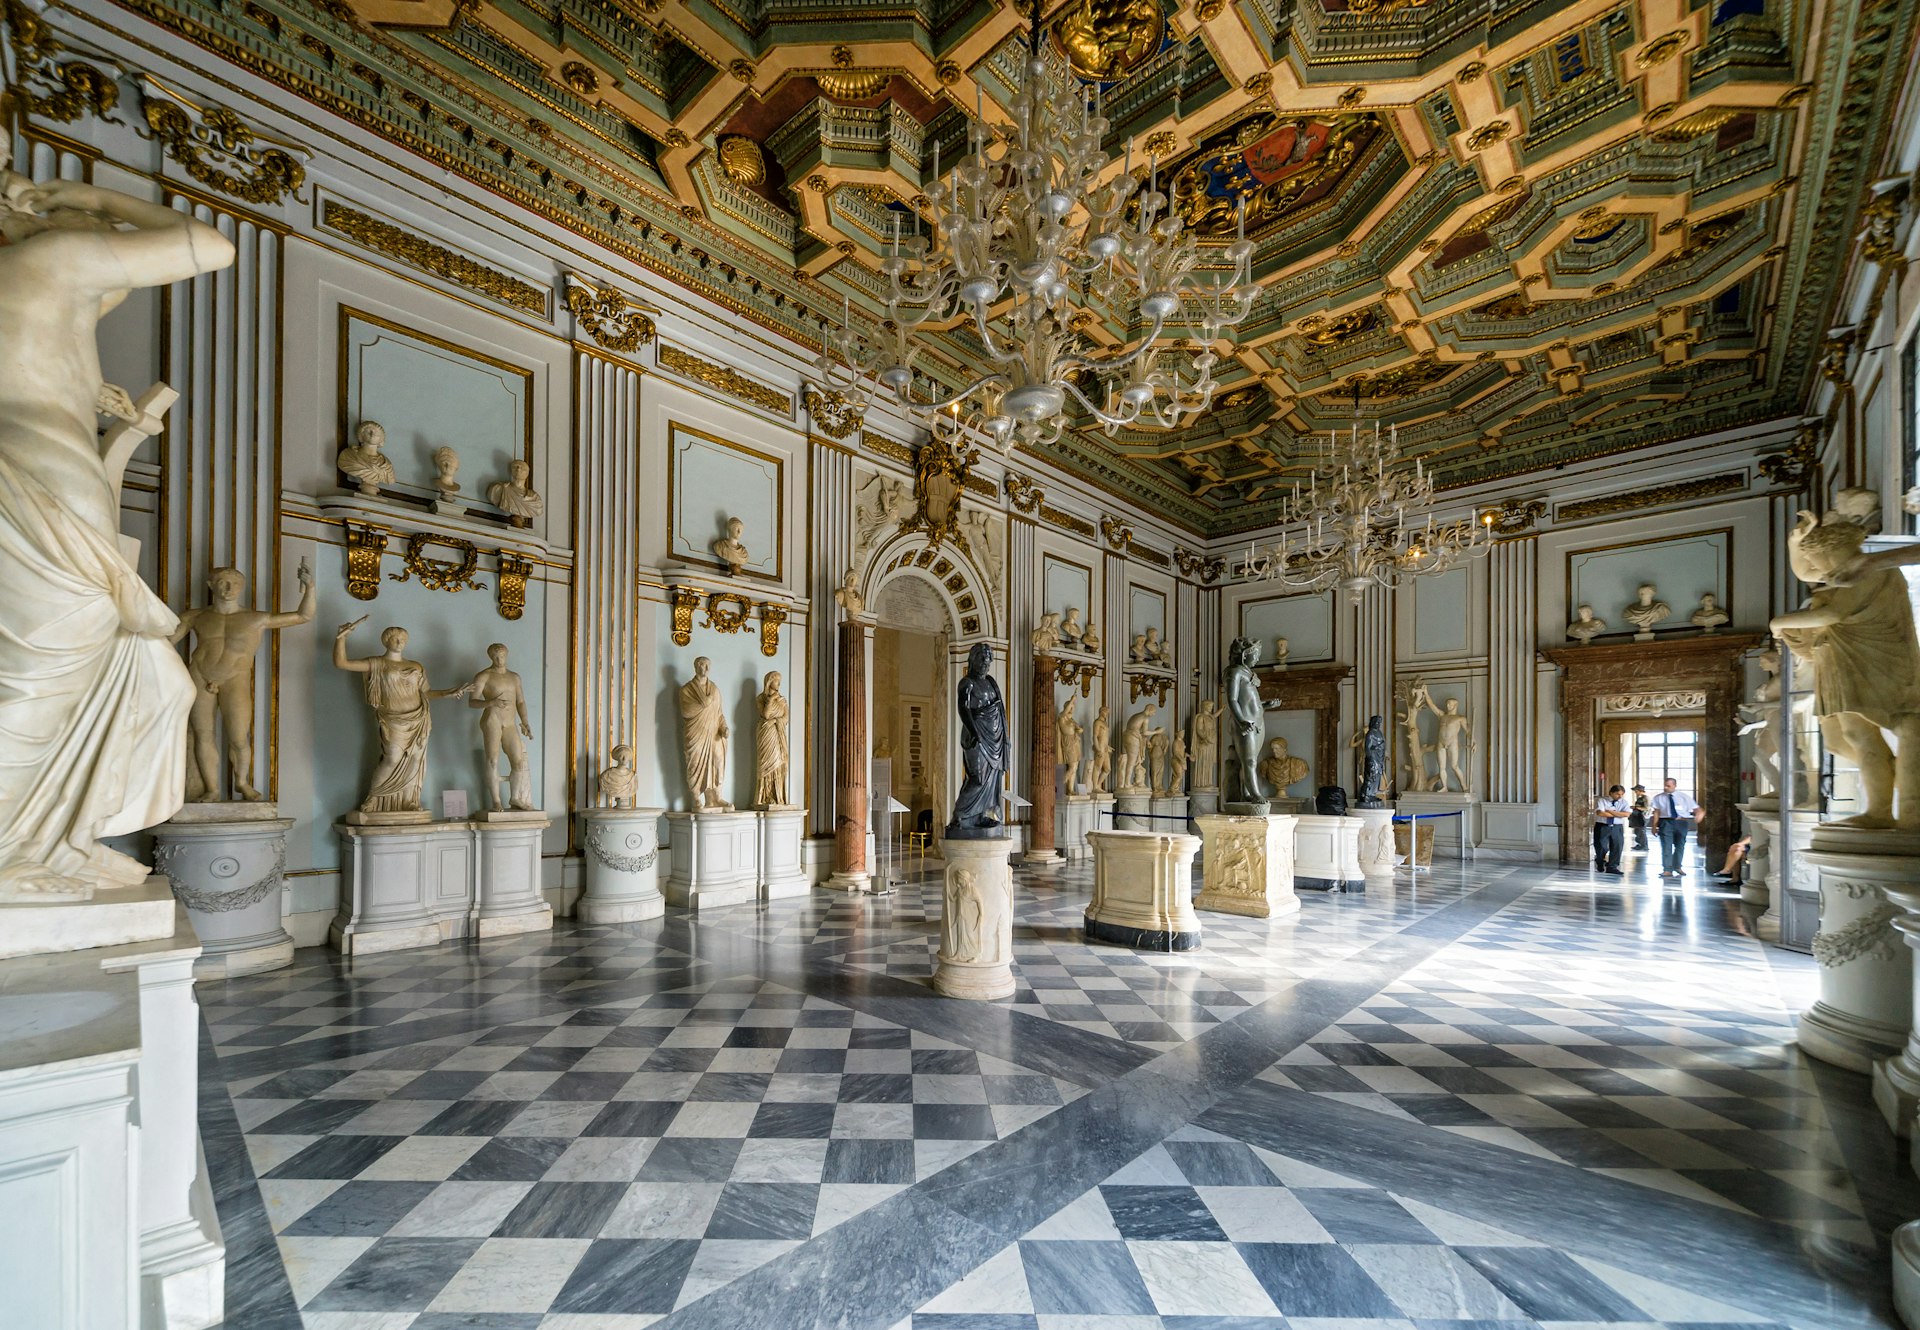 A room with a black-and-white tiled floor is lined with marble sculptures